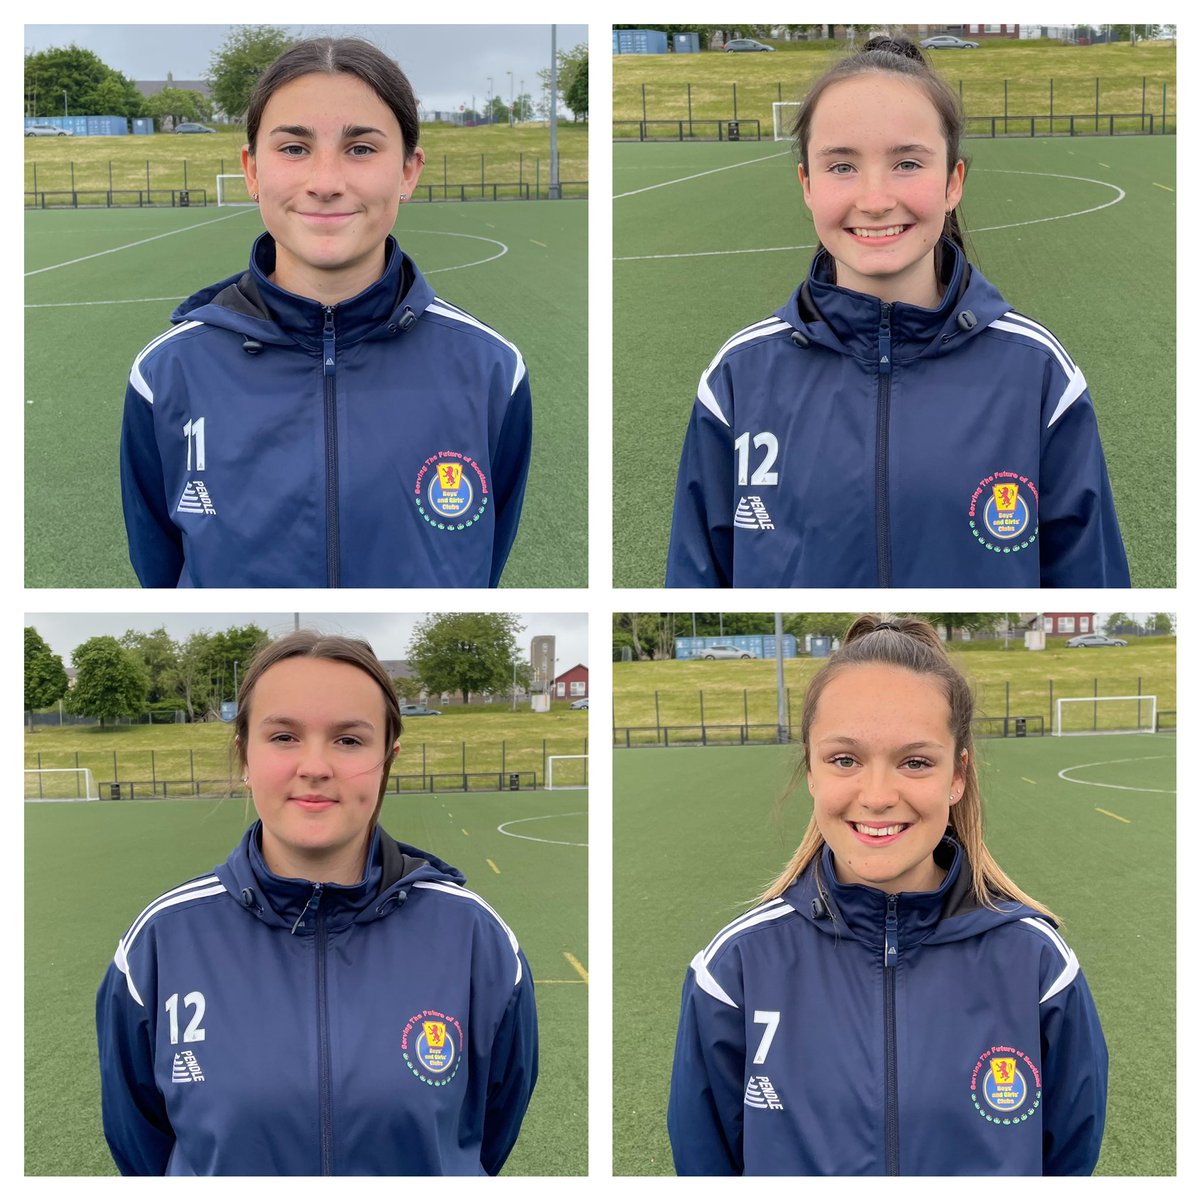 All the very best to @Dryburghgirls Rebecca Lonie, Beth Collins, Clara Laing & Kiah Irvine this weekend 🏴󠁧󠁢󠁳󠁣󠁴󠁿 The players head off for an International weekend away with @BGCScotland U15s & U17s who play BGC Wales on Sunday at the @FalkirkStadium 📲 dryburghacc.co.uk/news/5101